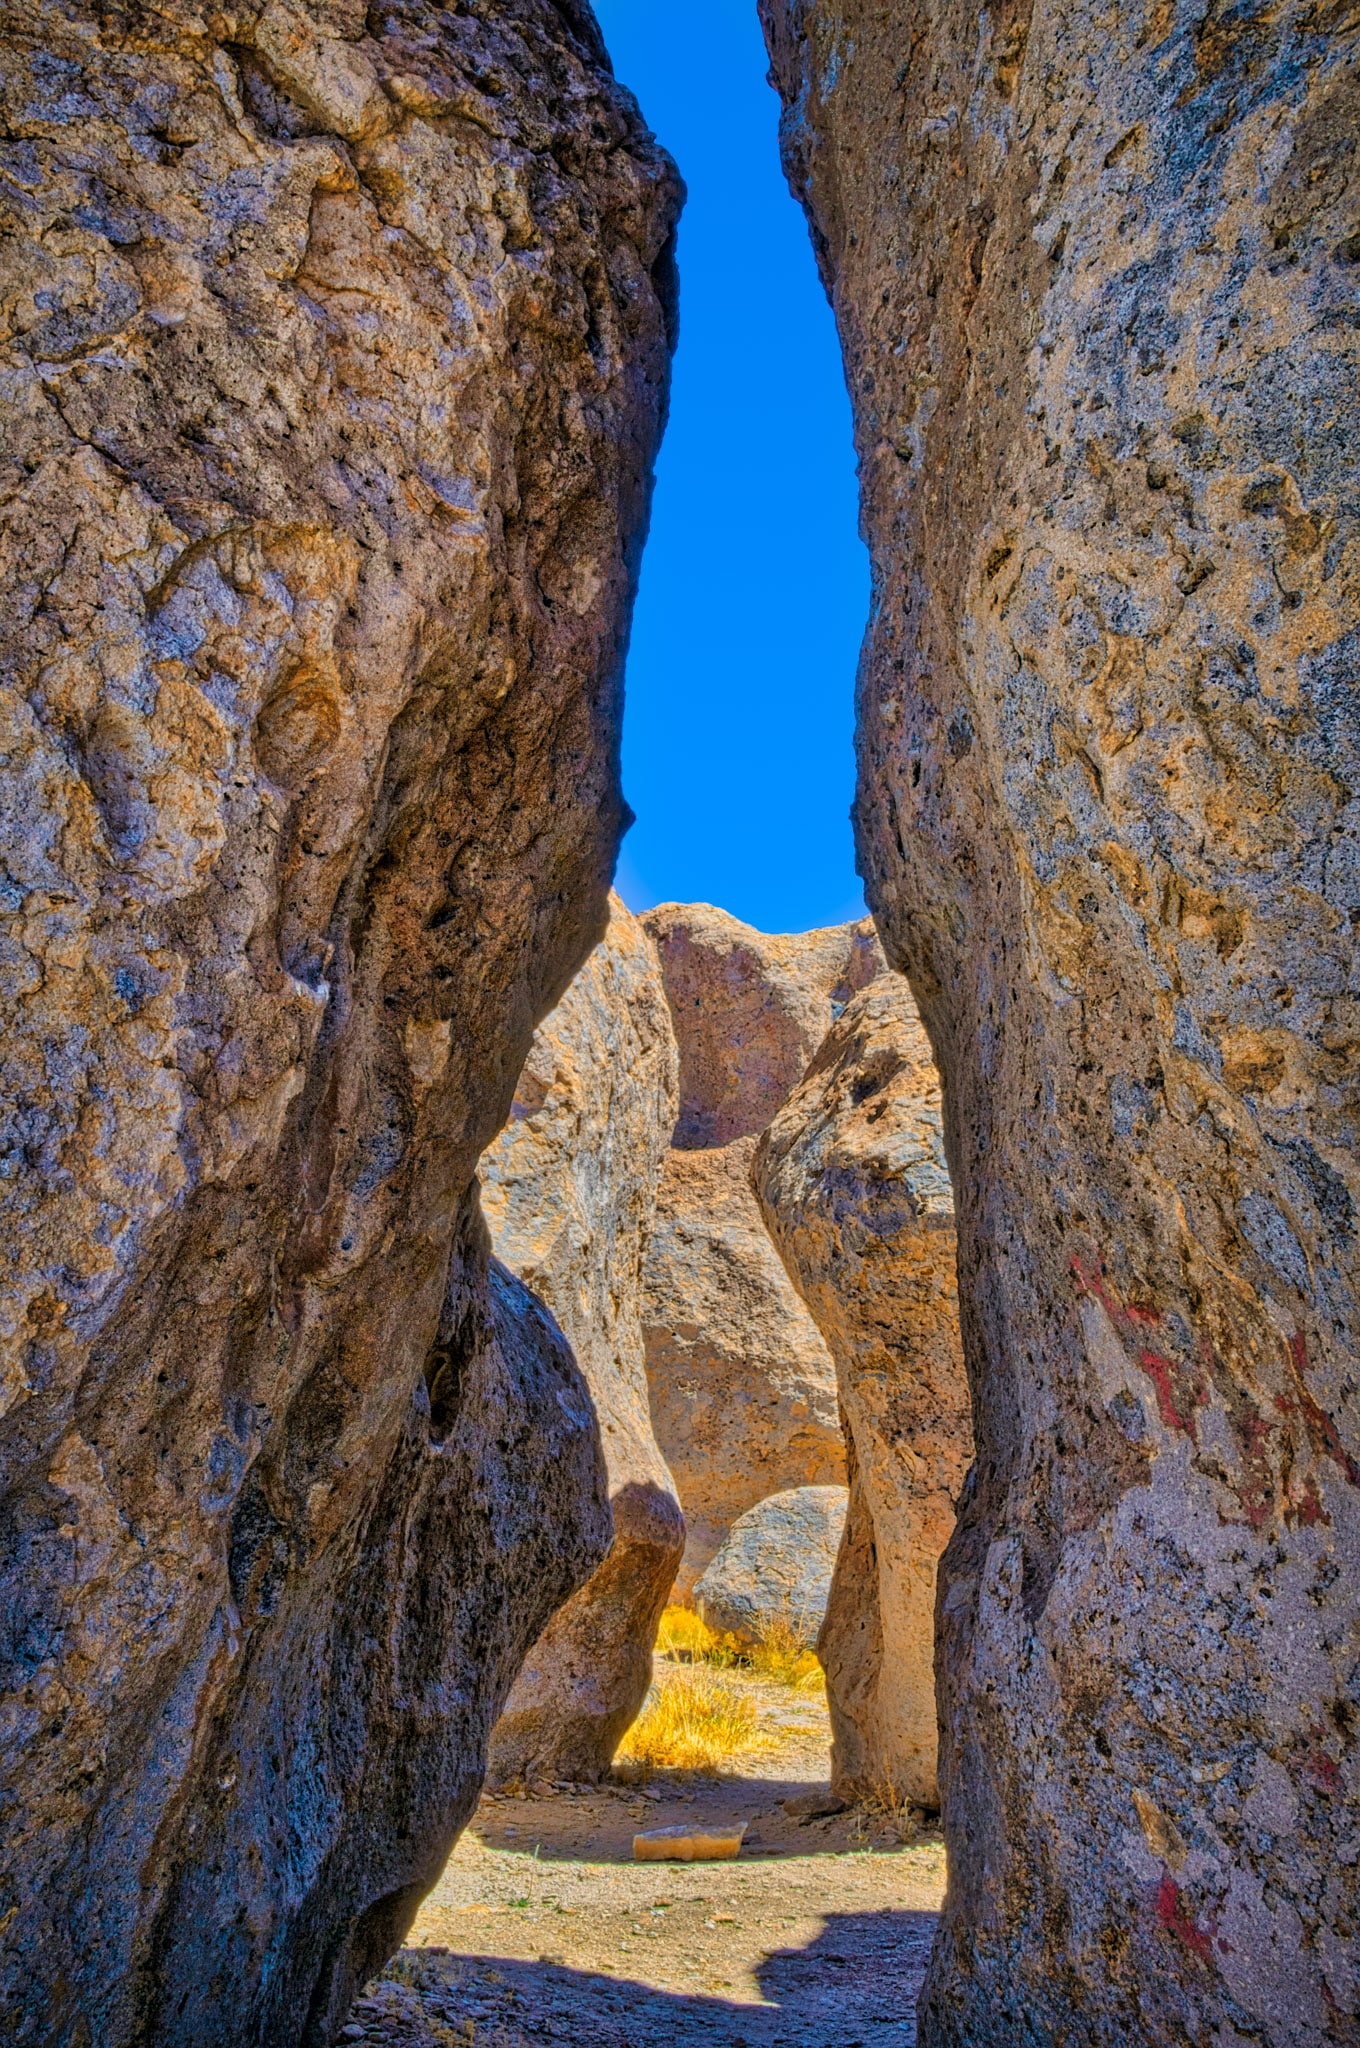 A path through the eroded tuff pinacles in City of Rocks State Park in New Mexico.